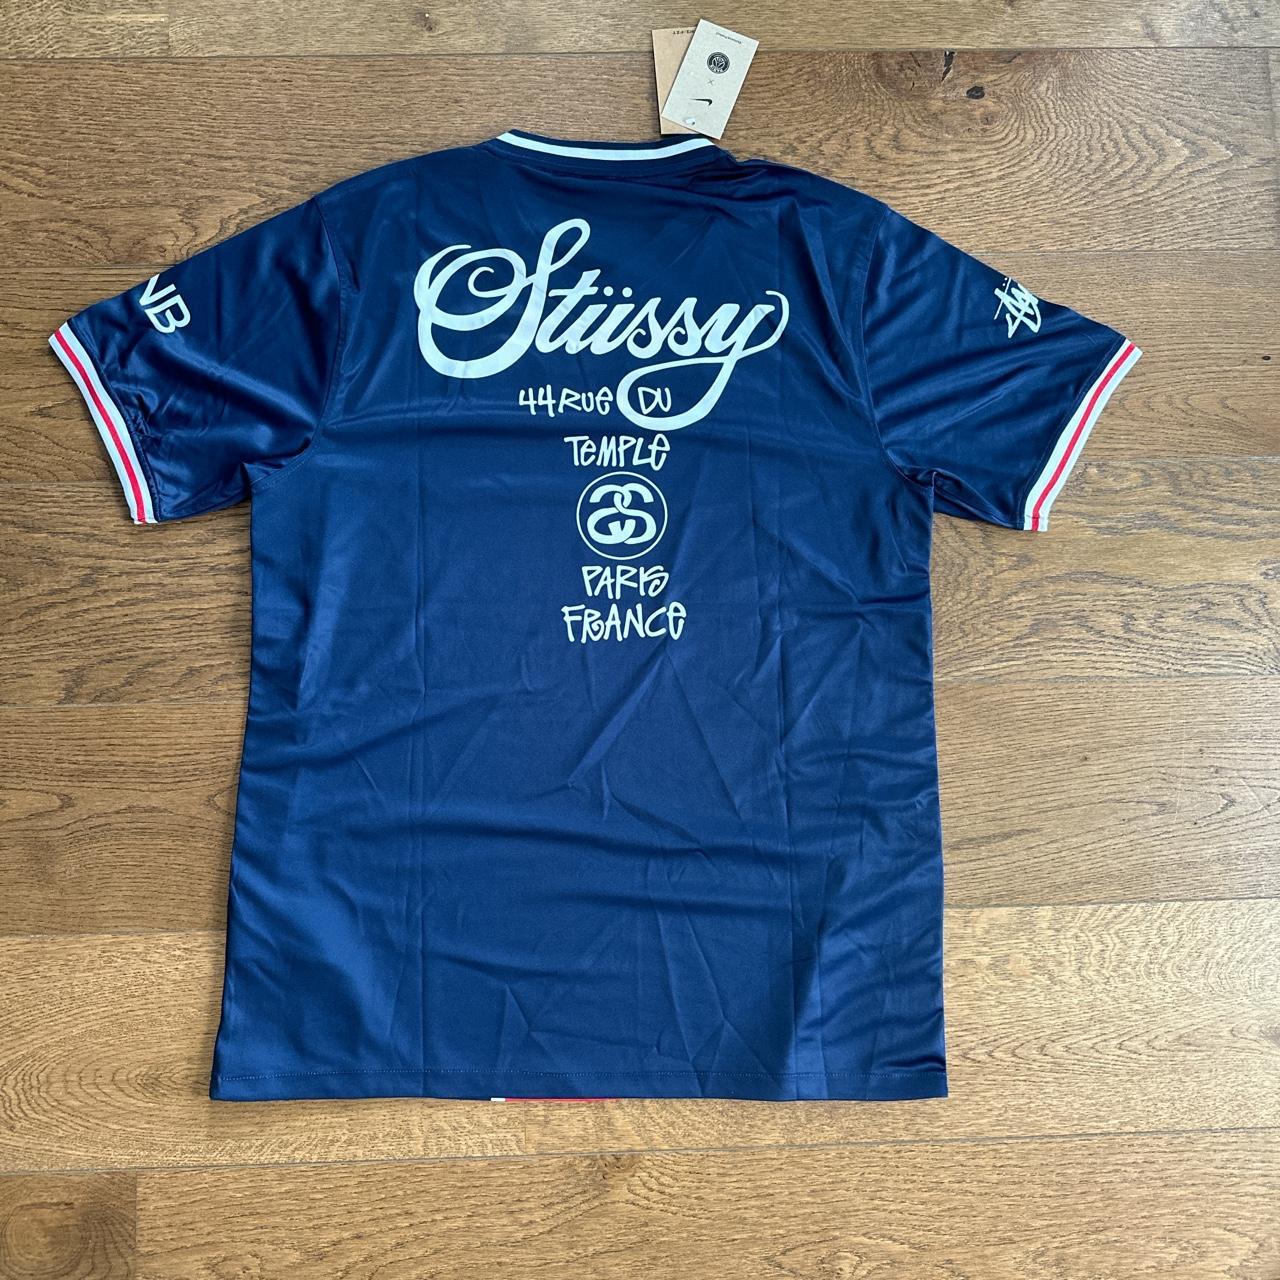 Stussy x PSG shirt Brand new, only tried on but was... - Depop